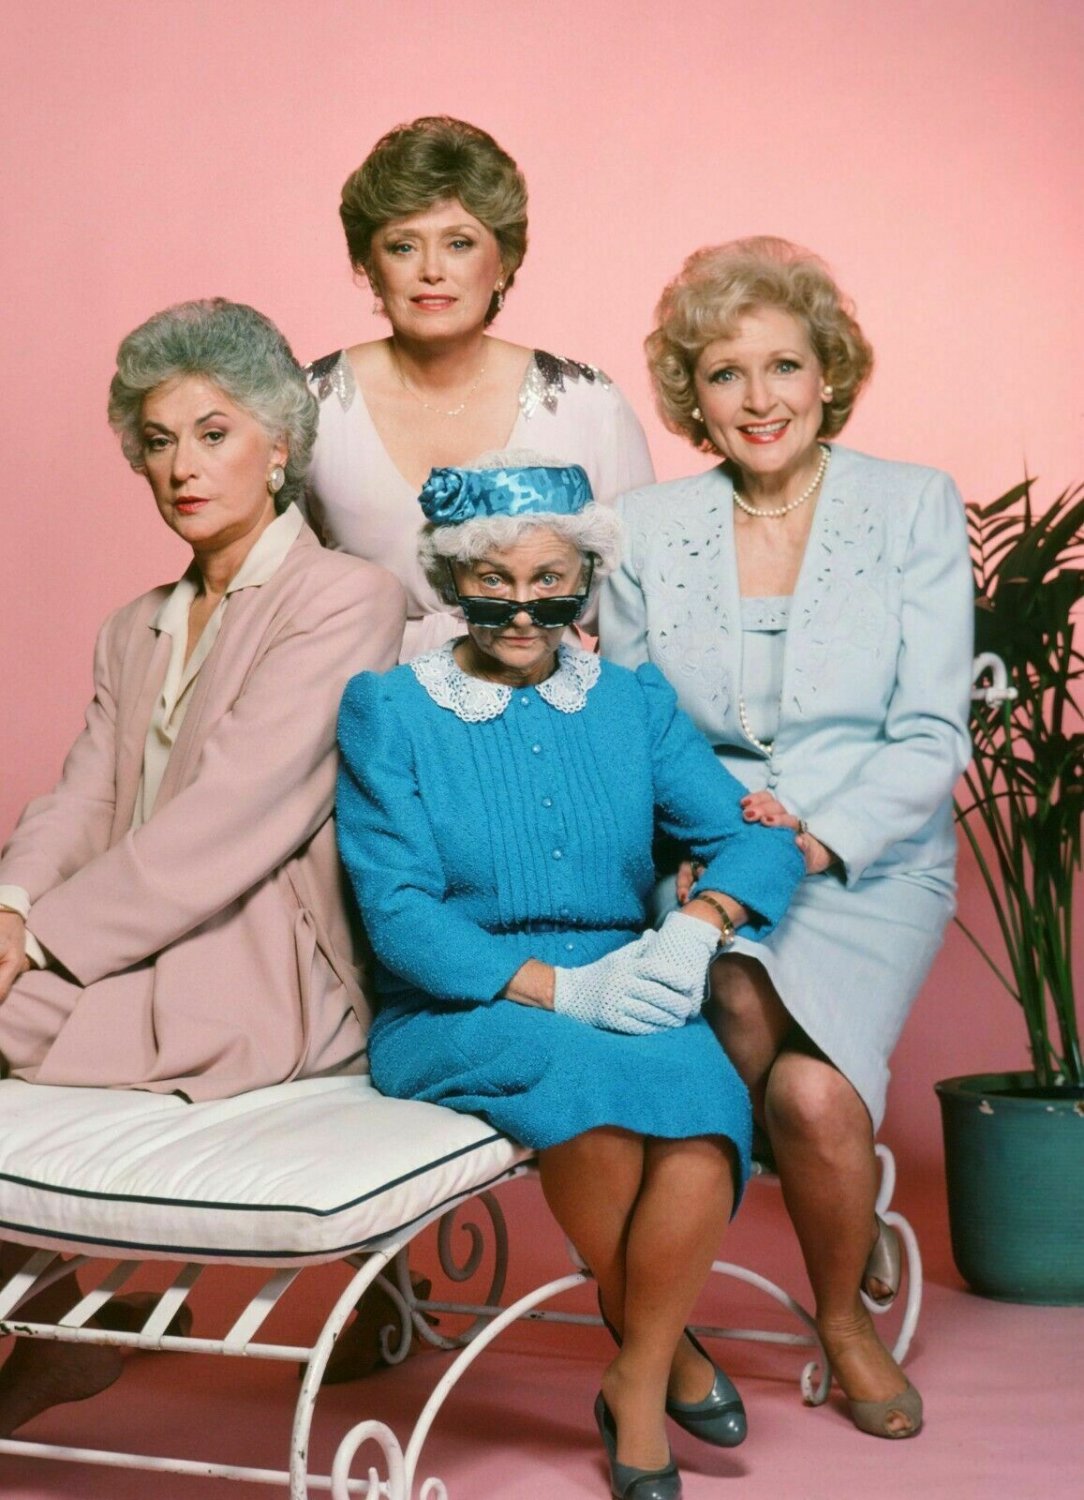 The Golden Girls Cast Tv Show 11x14 Glossy Photo 1028